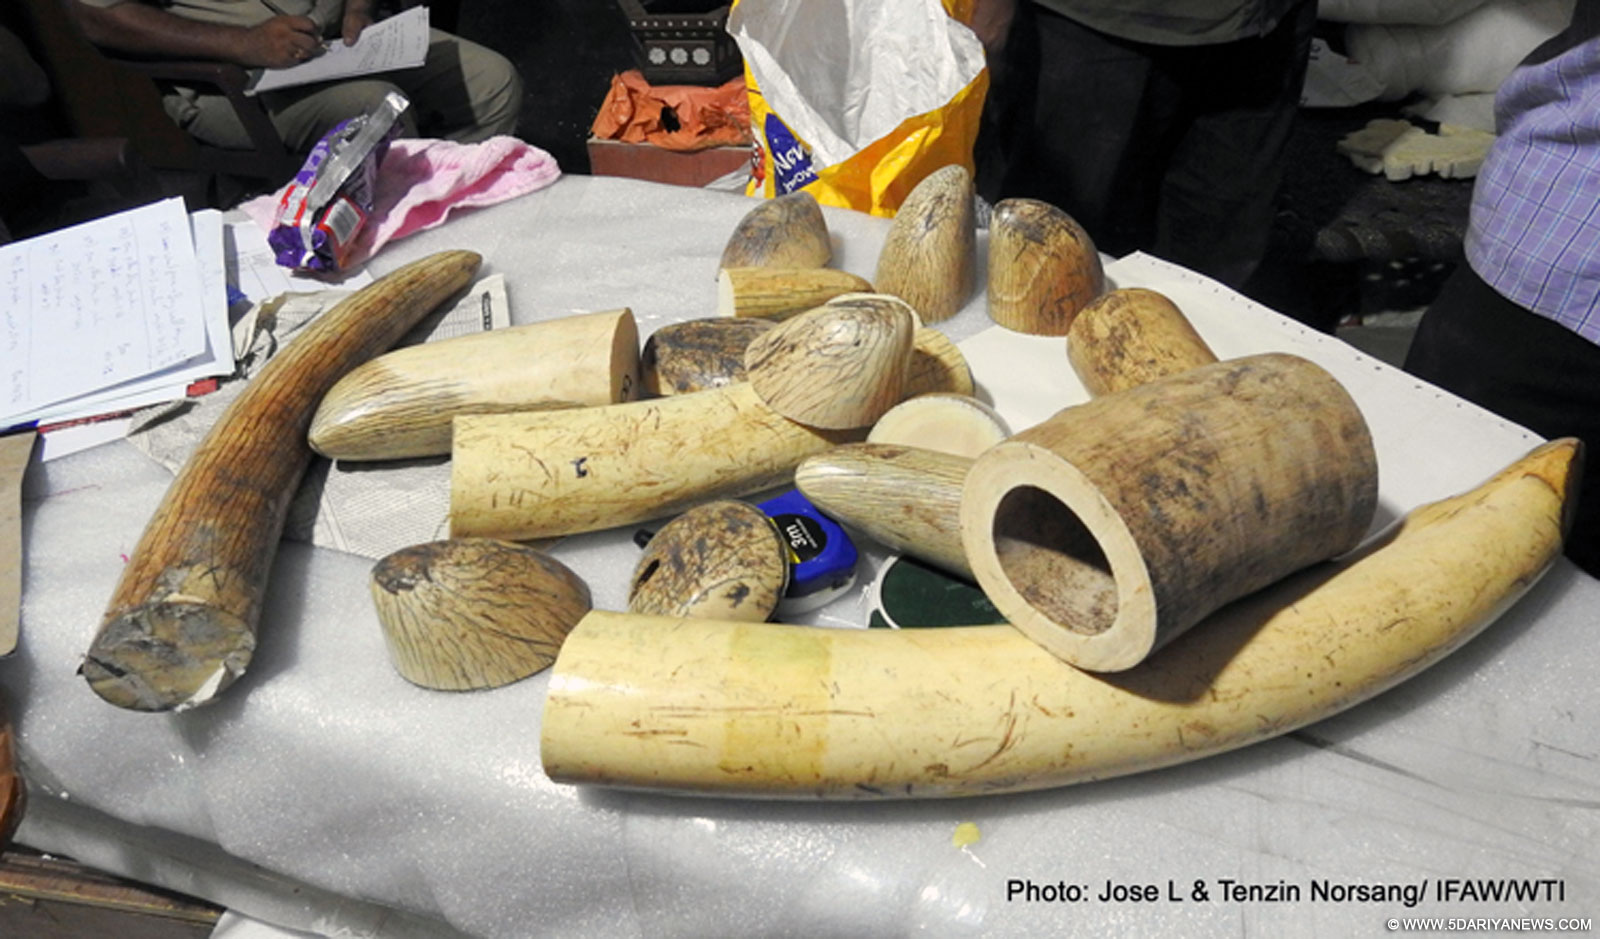 Ivory worth over Rs.19 crore seized in Delhi